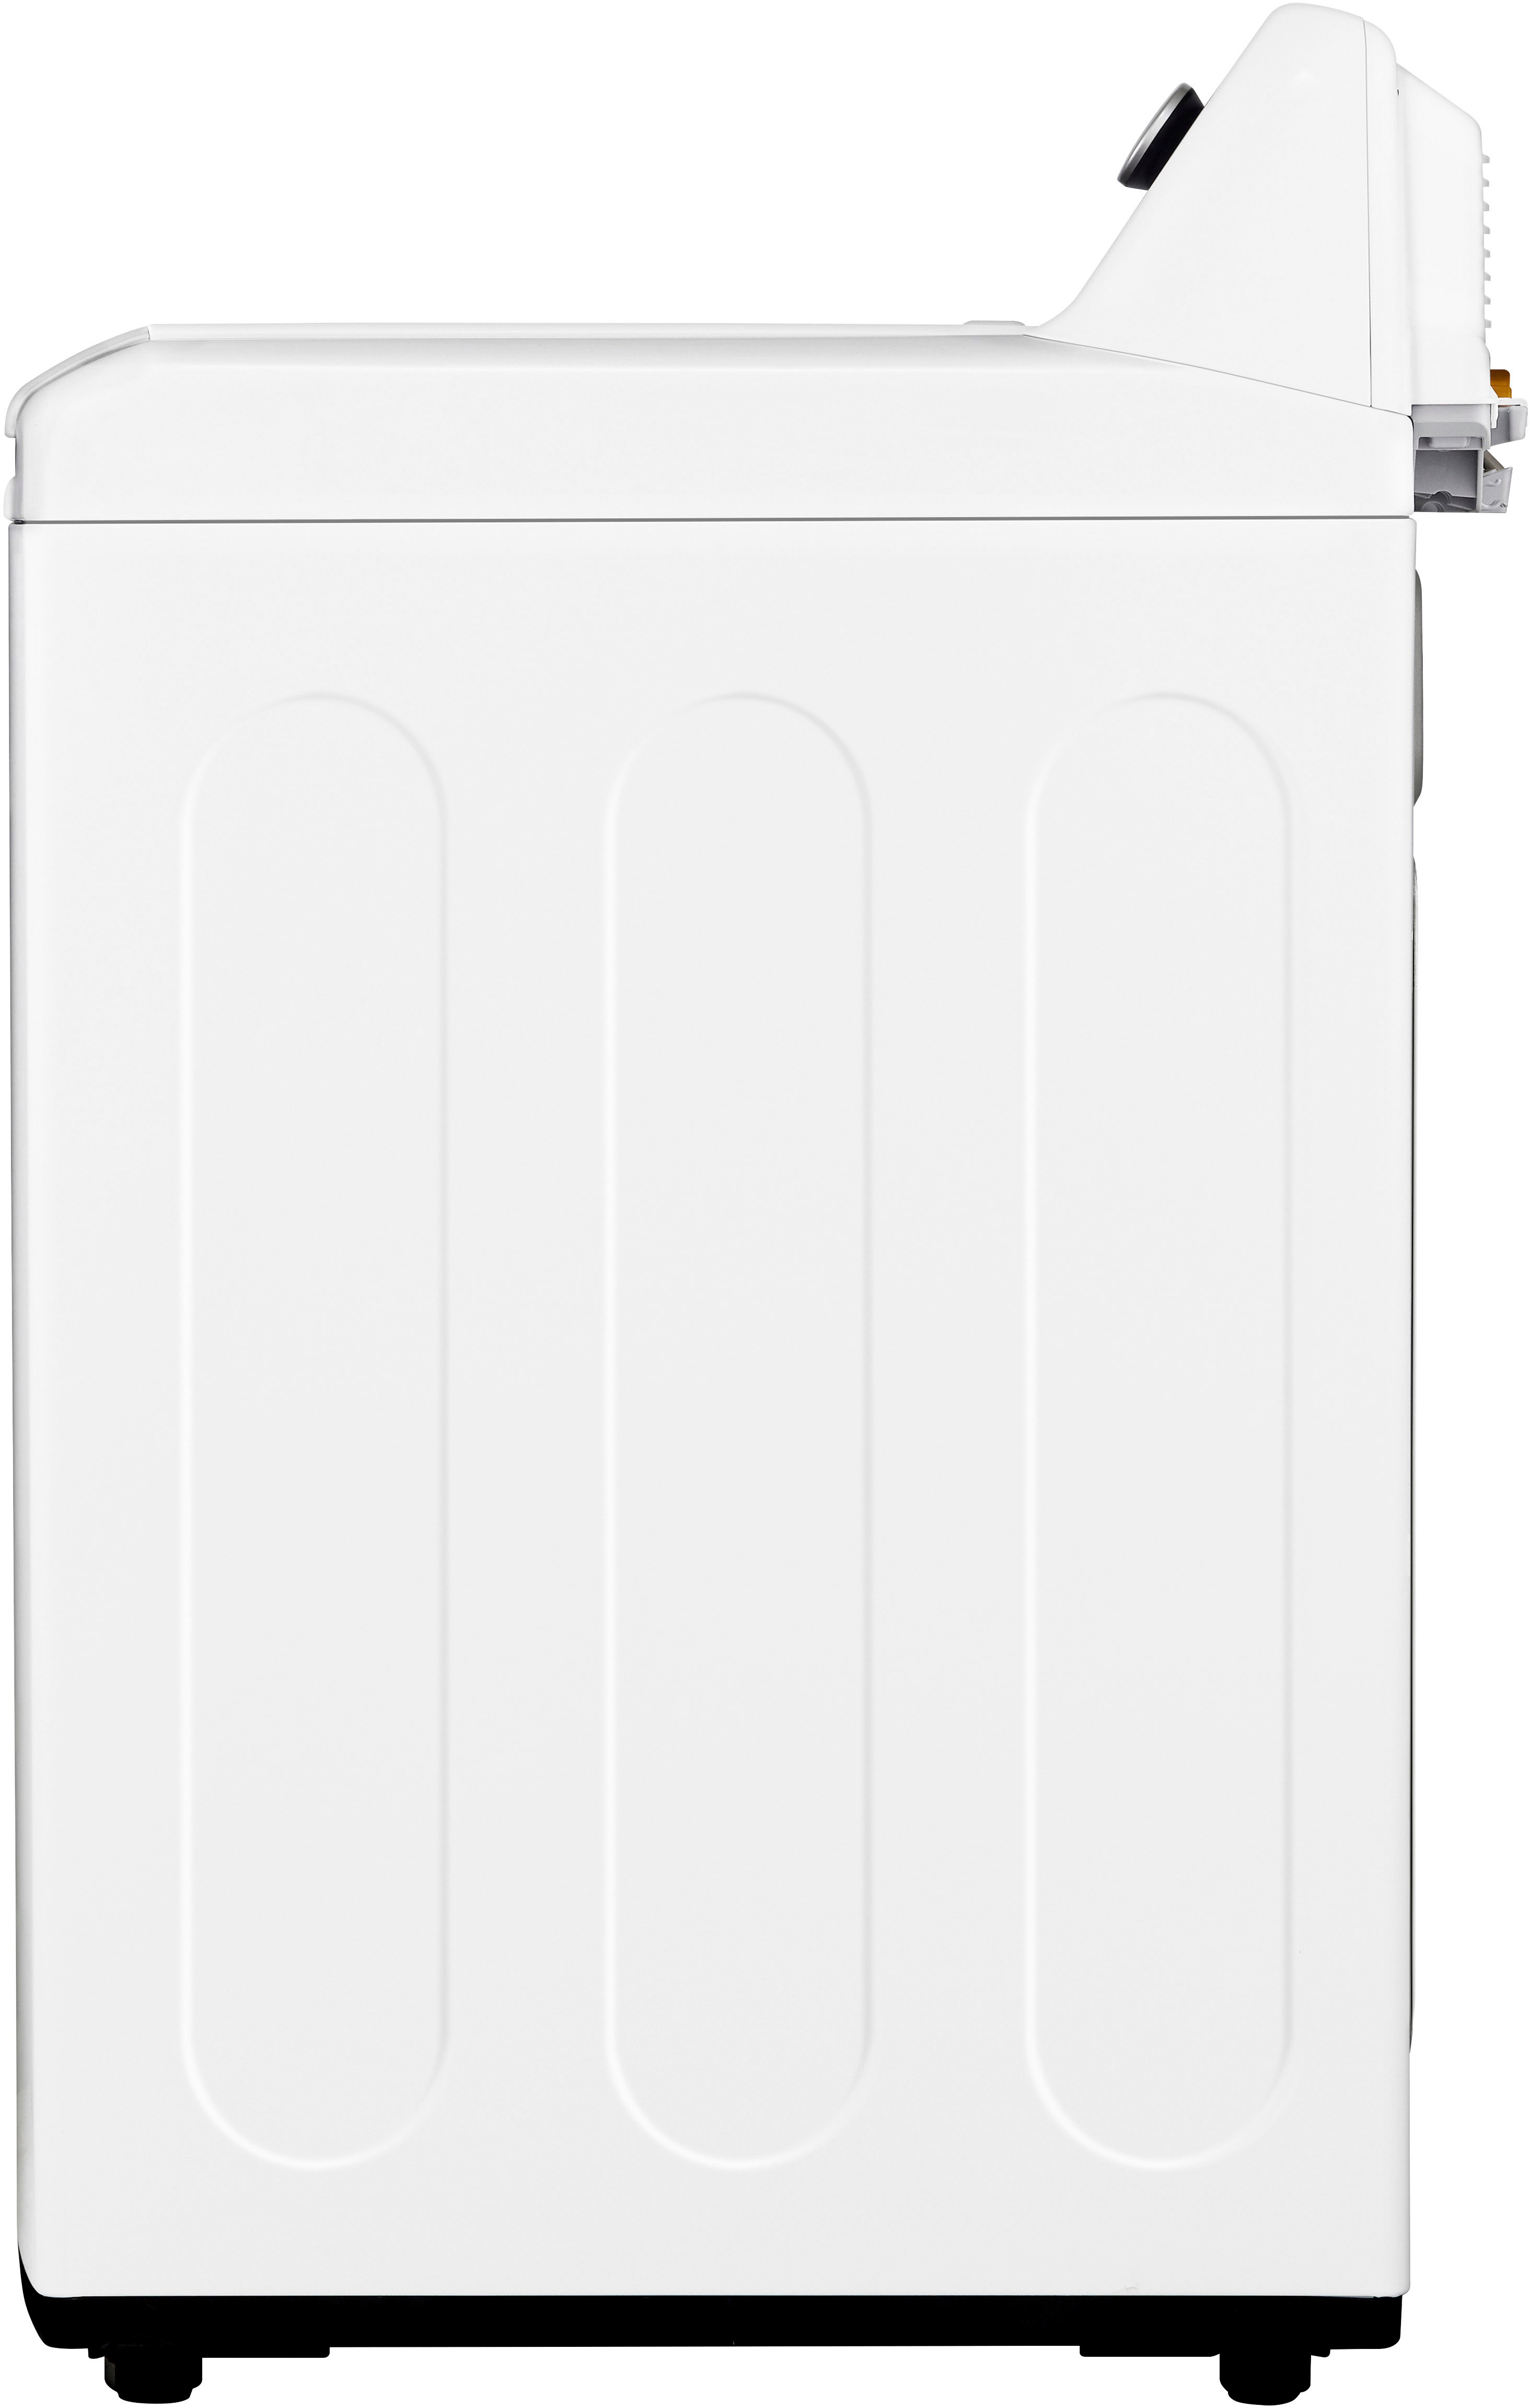 Angle View: LG - 4.8 Cu. Ft. High-Efficiency Smart Top Load Washer with 4 Way Agitator and TurboDrum - White